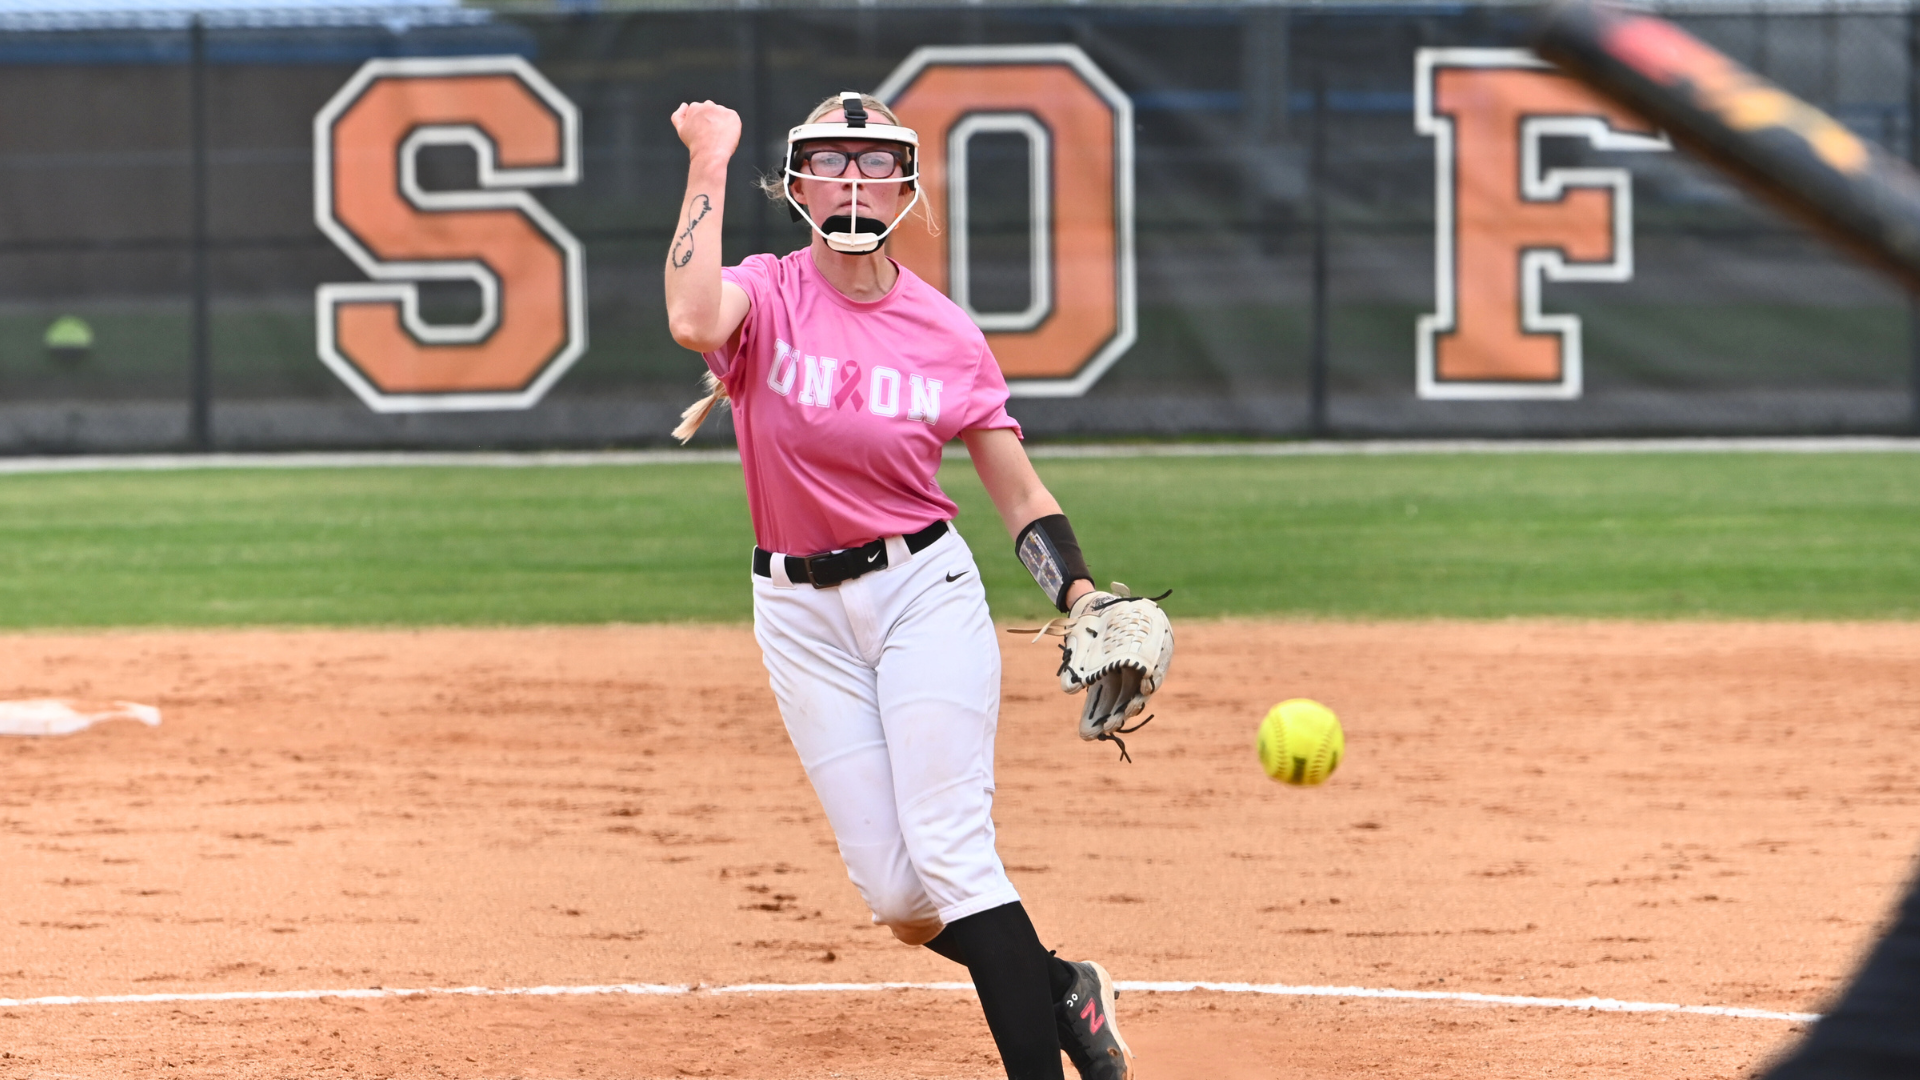 The Bulldogs fall to Campbellsville in doubleheader